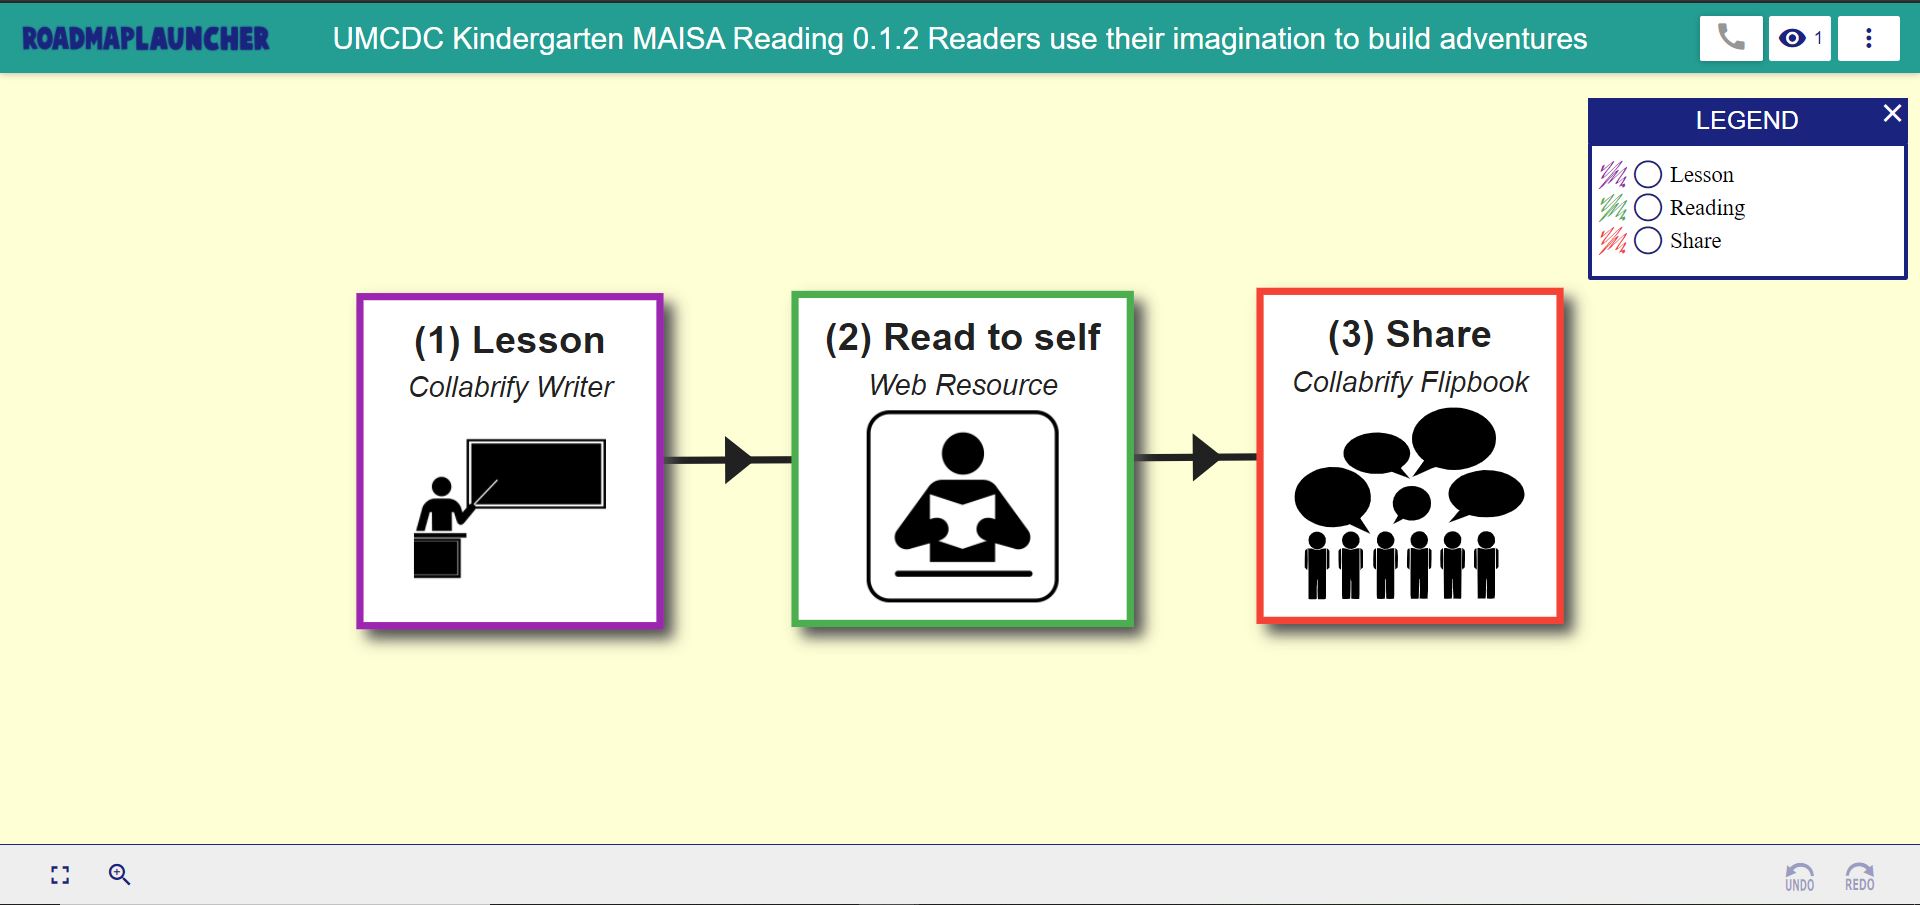 Image with squares and arrow mapping the lesson plan for a reading and writing kindergarten class